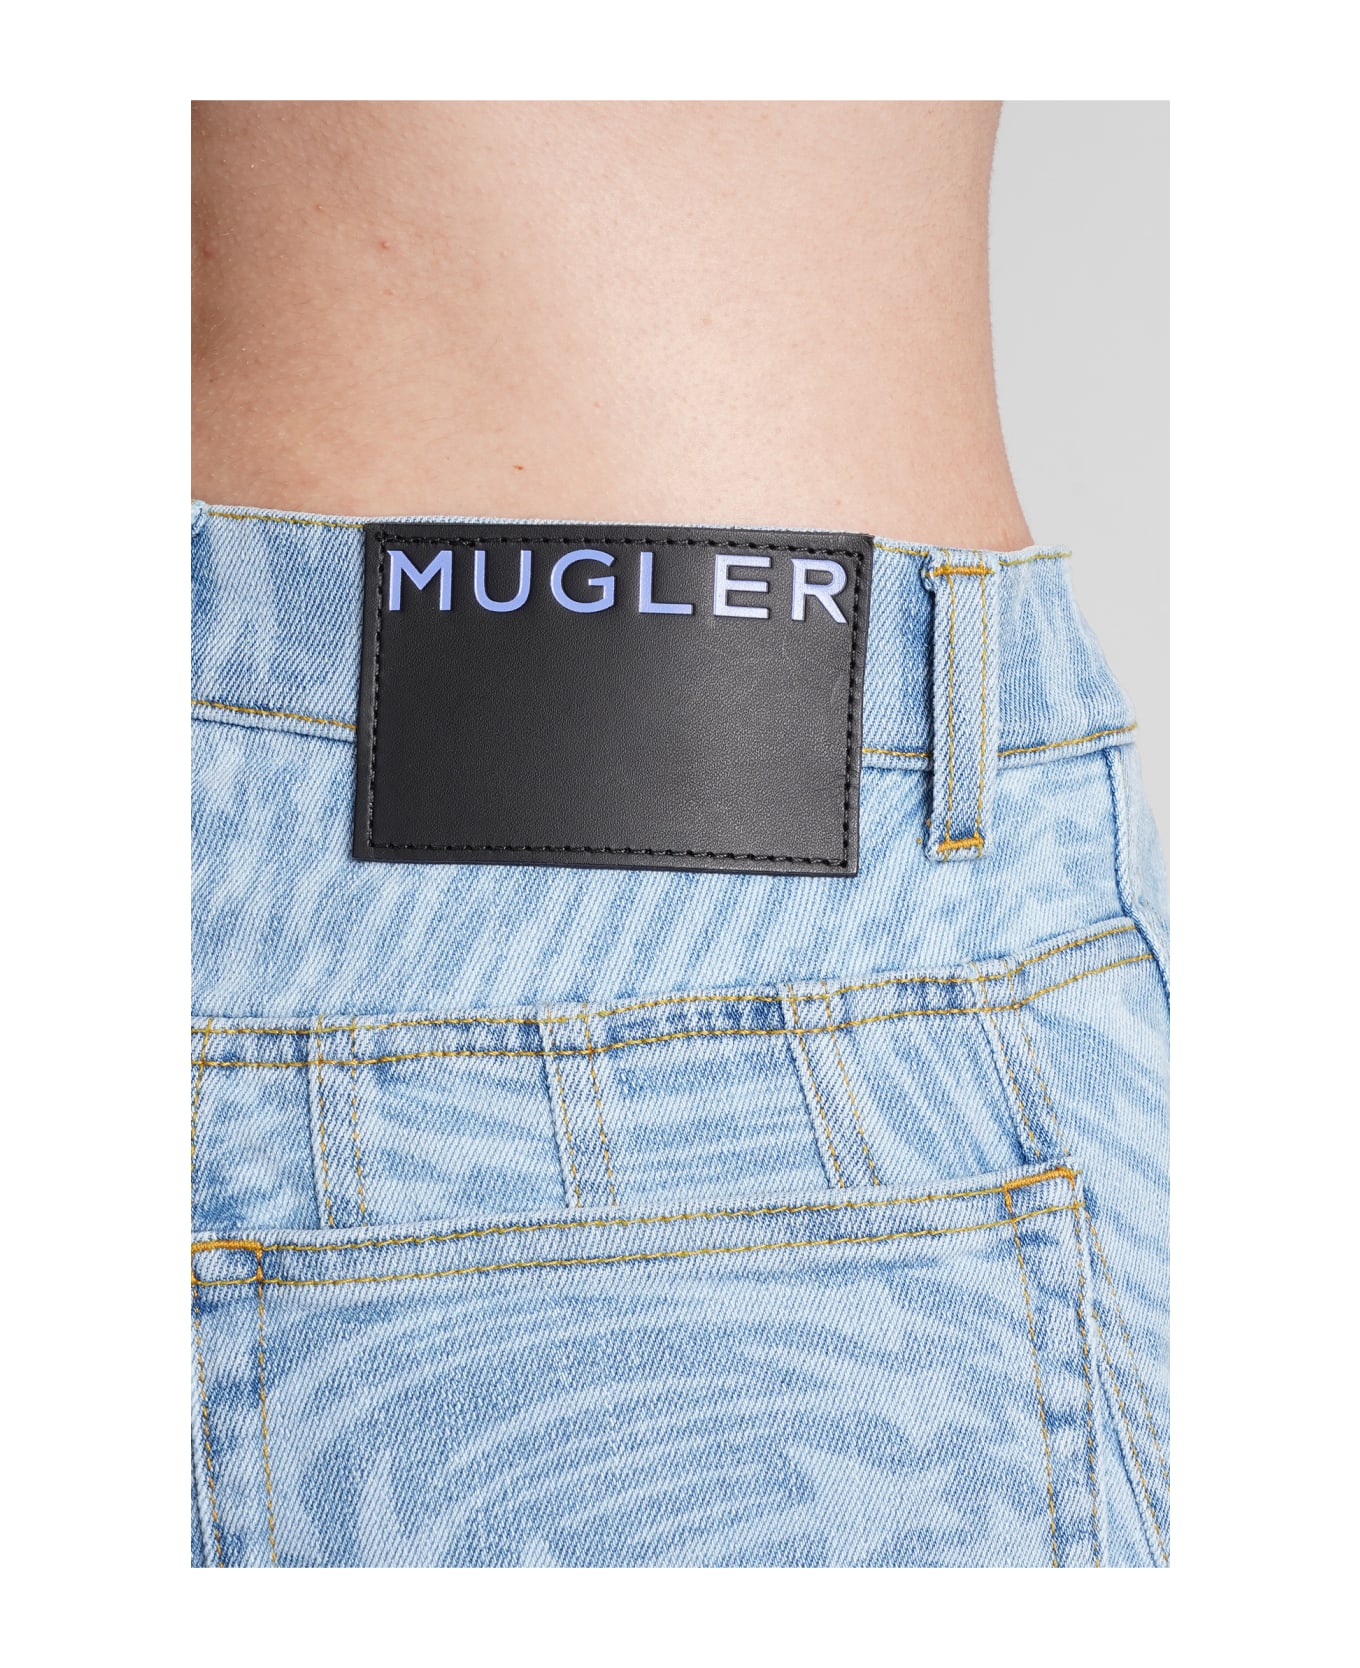 Mugler Jeans In Blue Cotton - blue ボトムス